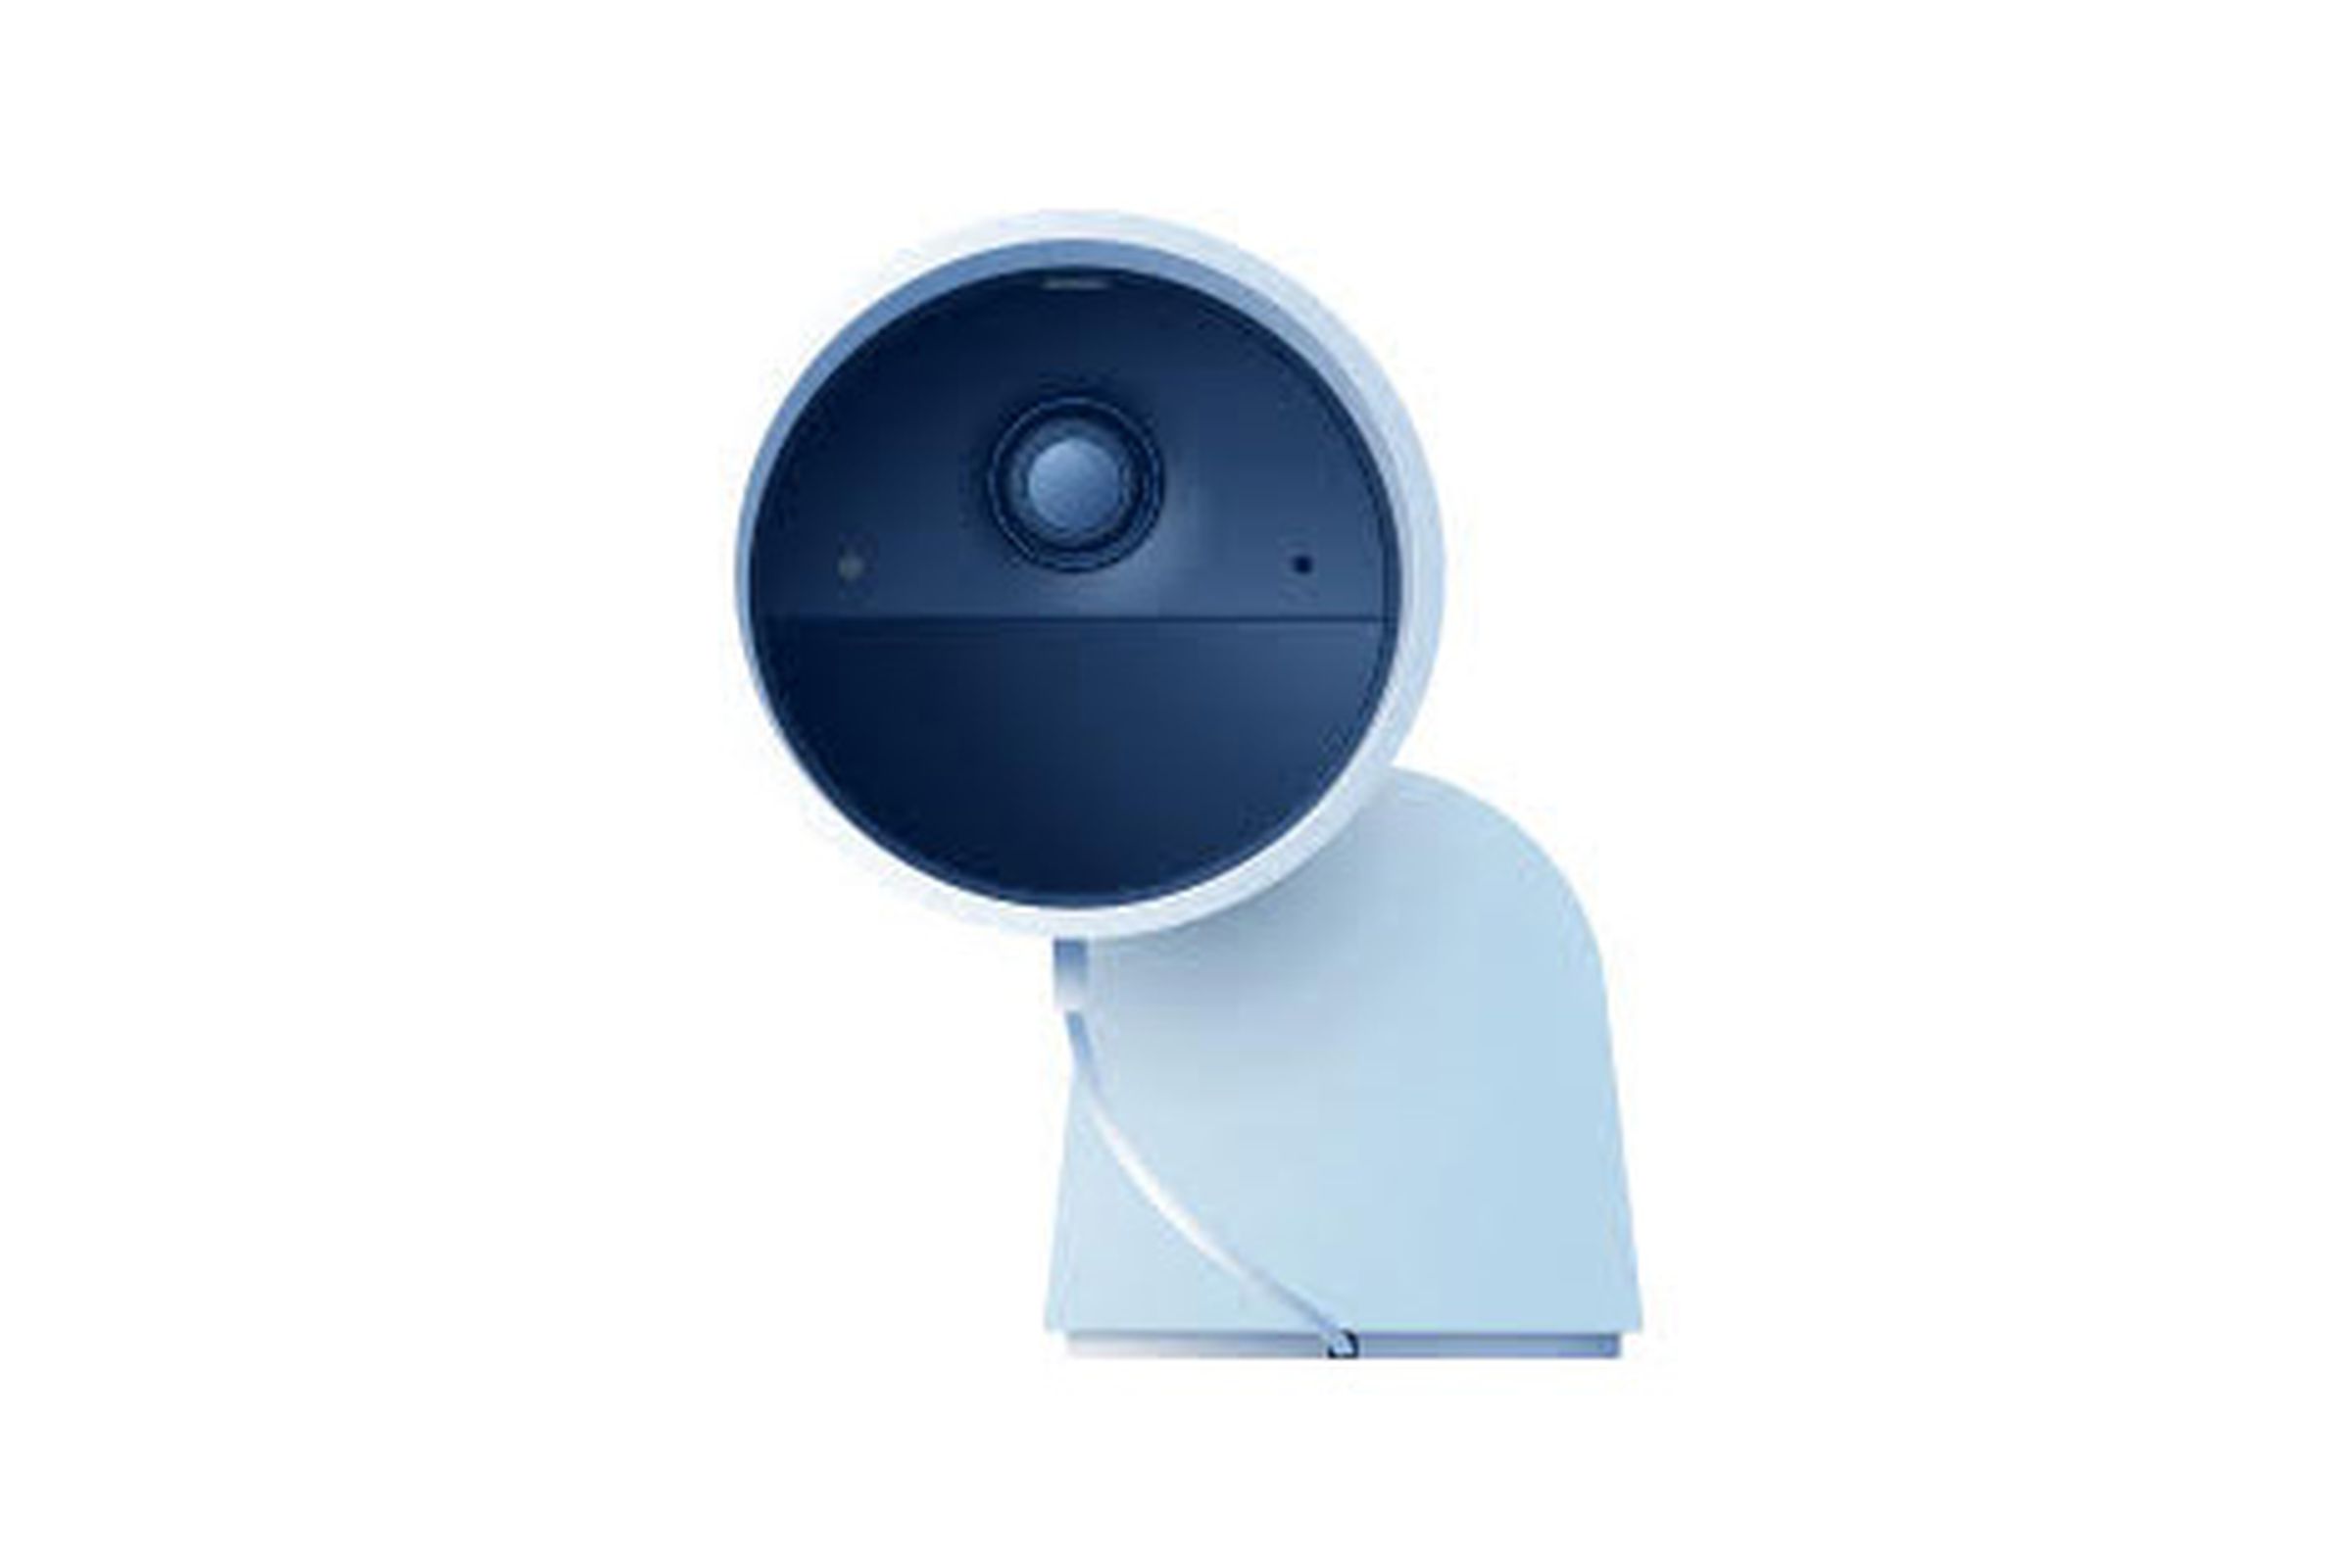 A render of Philips Hue’s security camera.